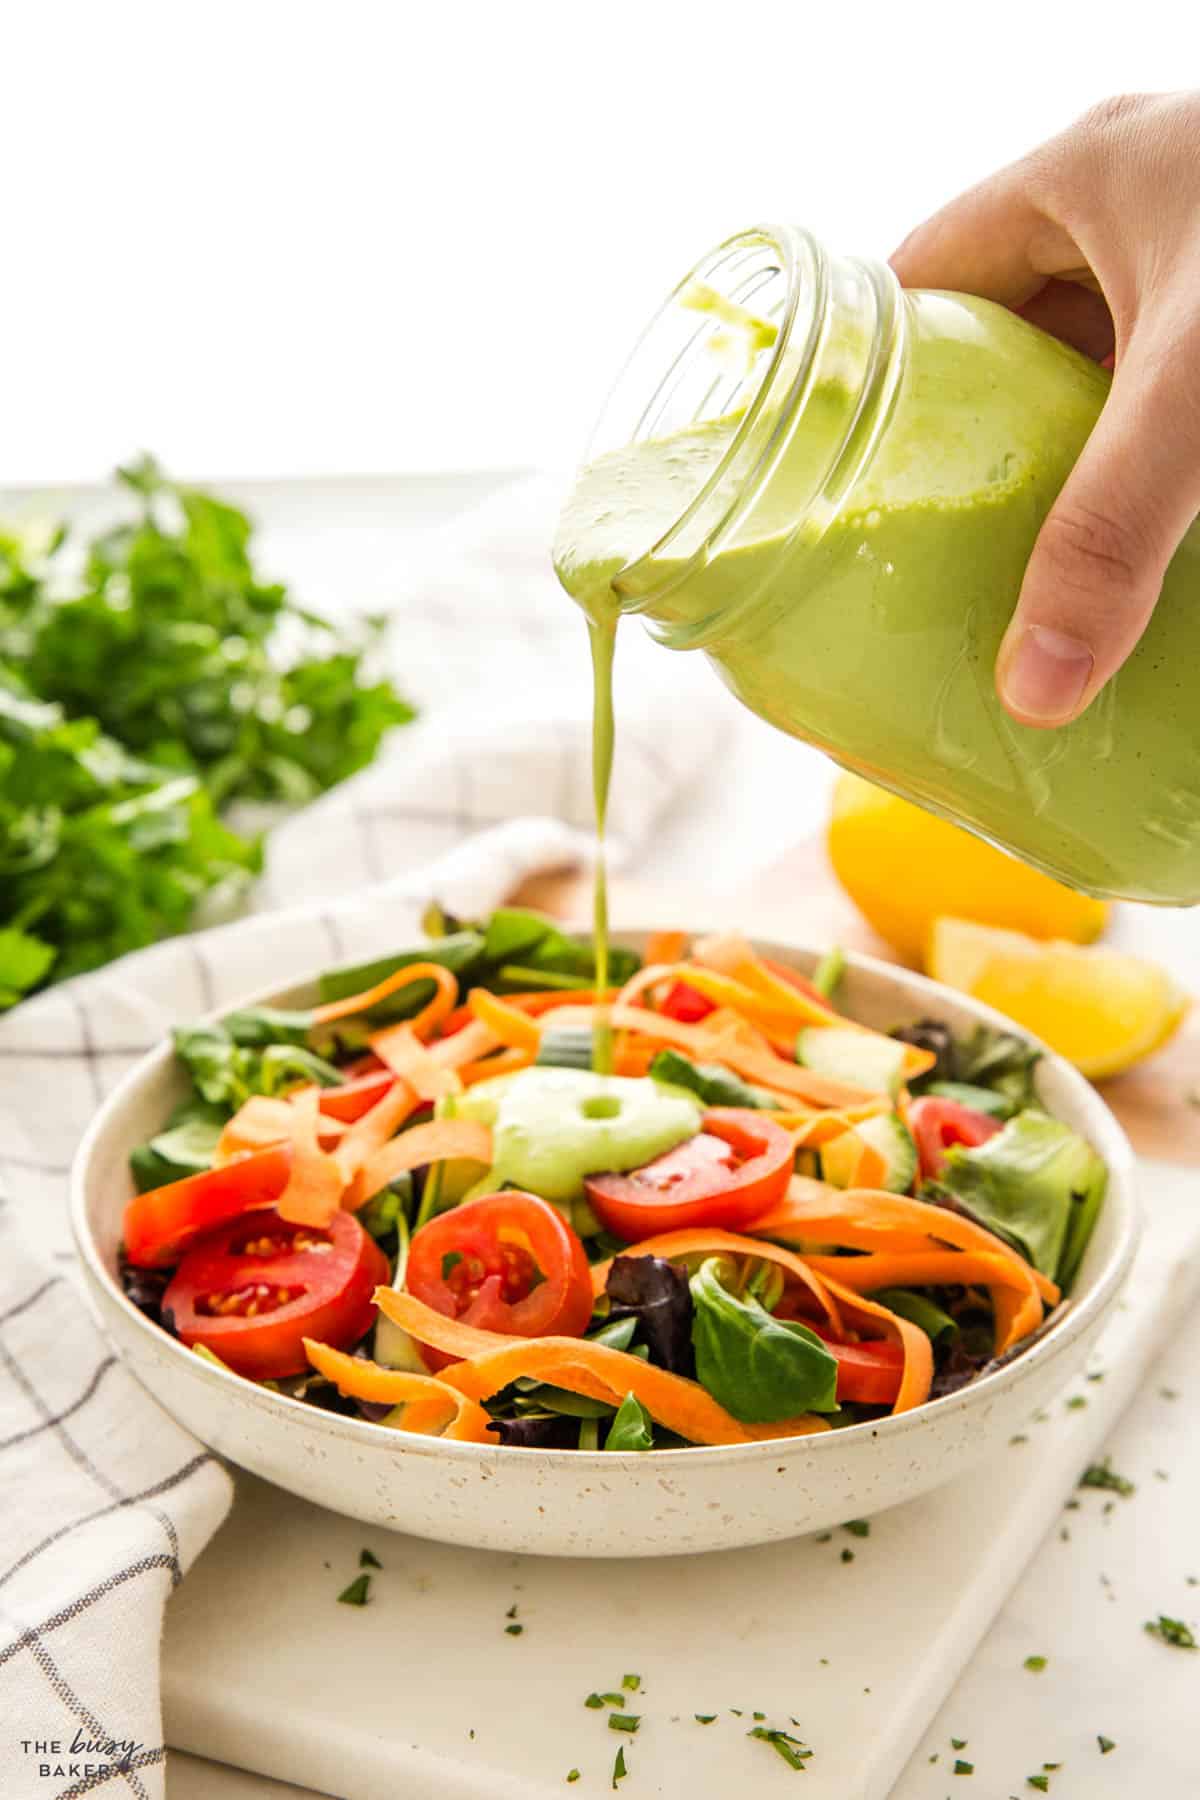 pouring Green Goddess dressing over a salad